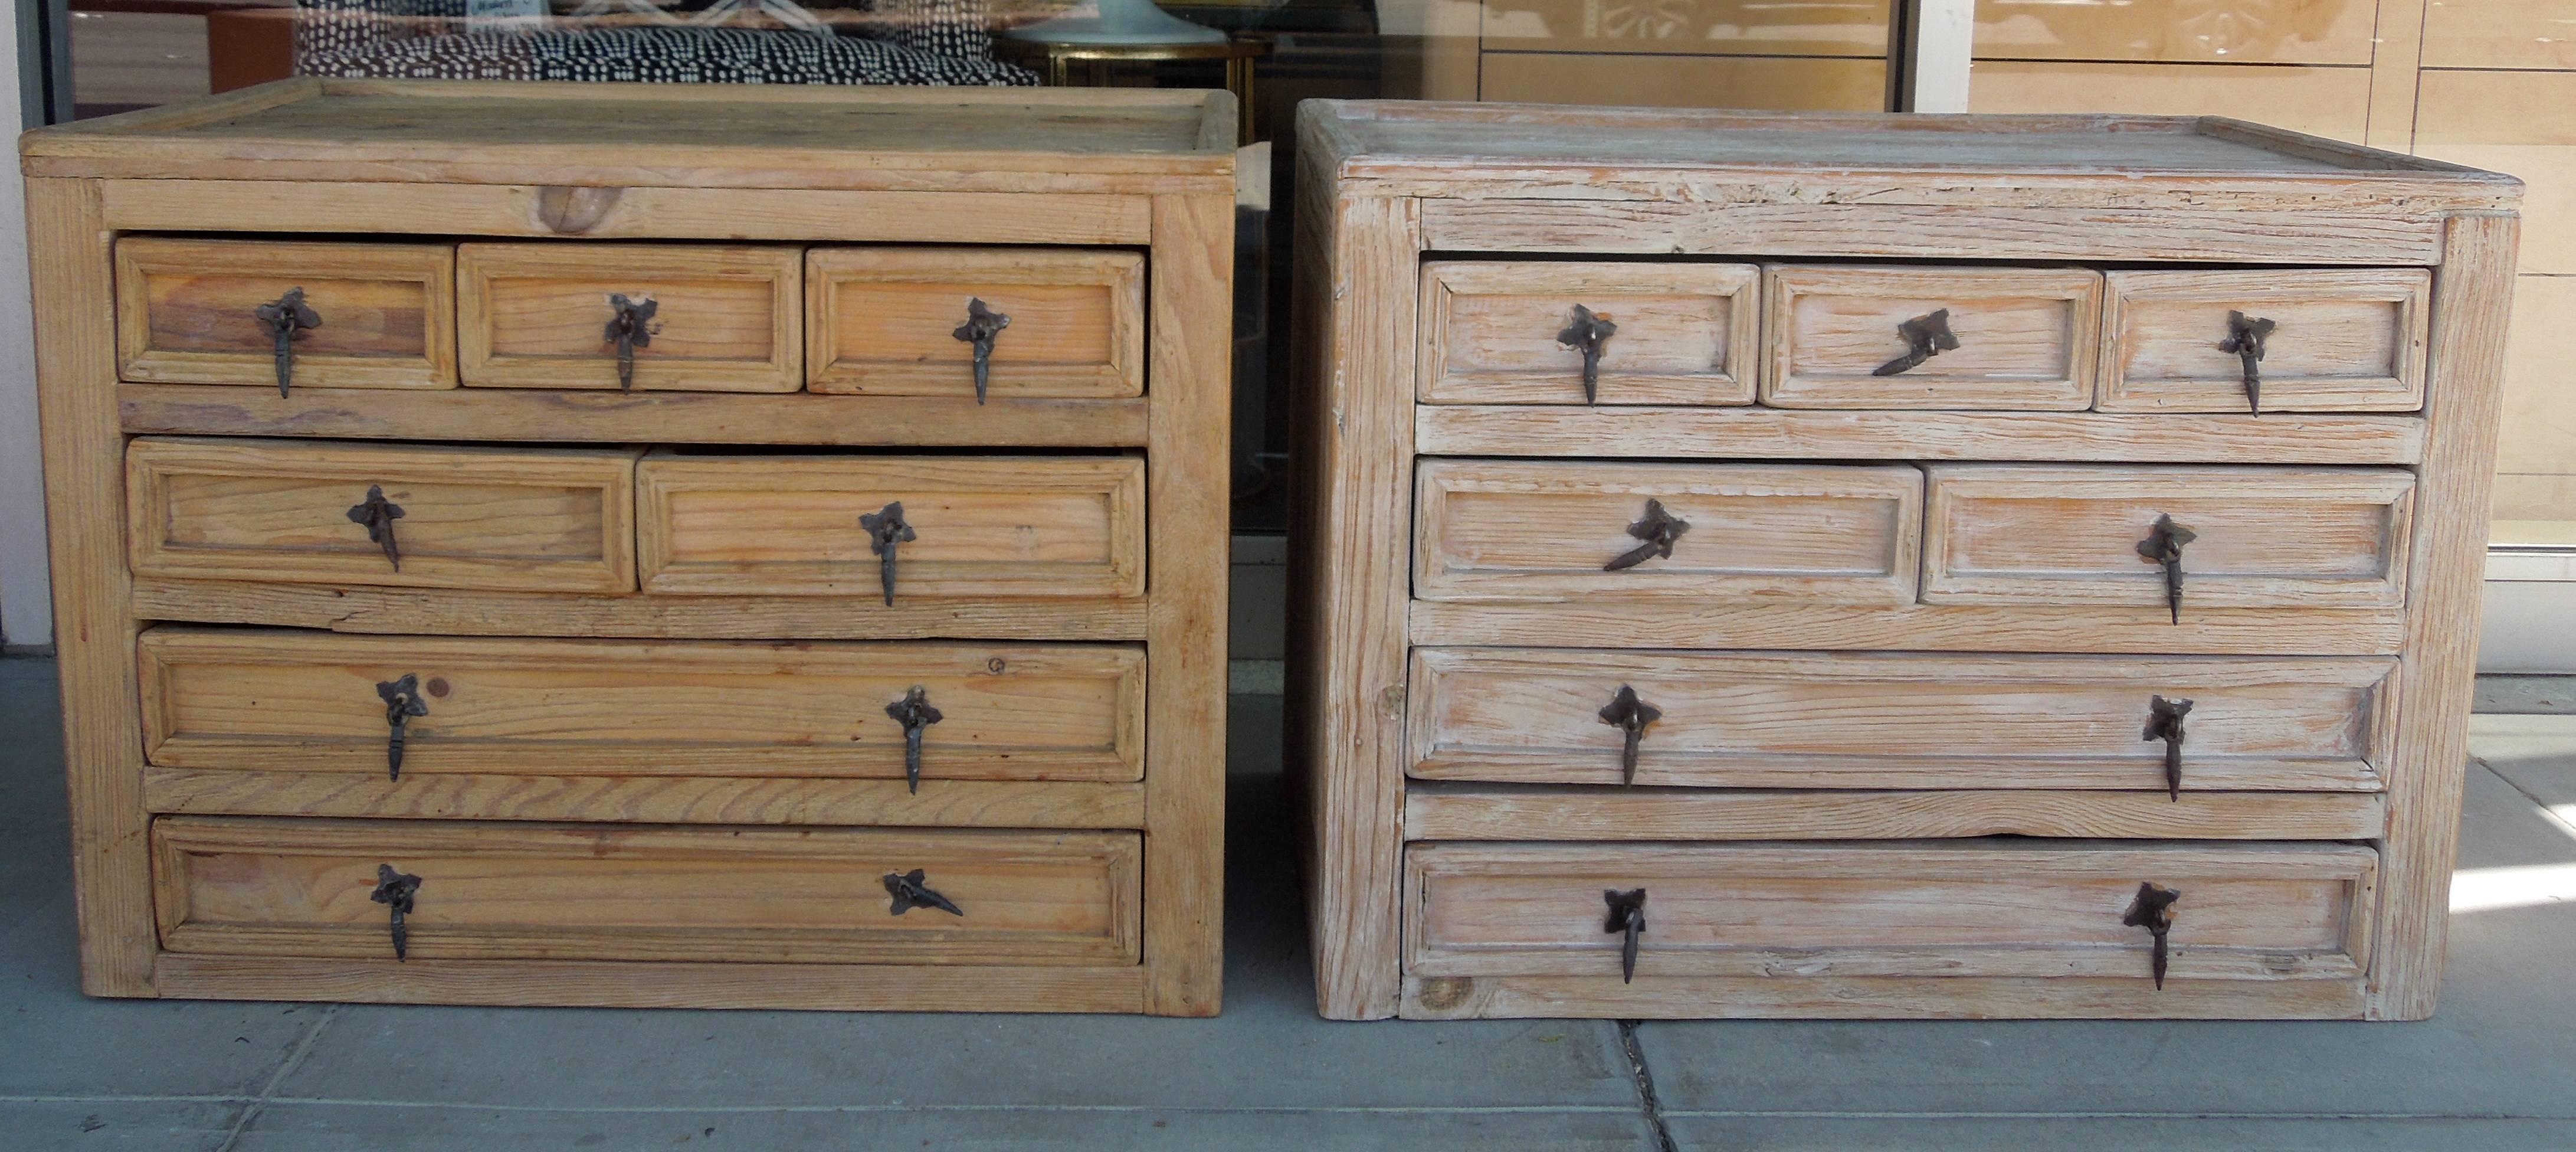 This pair of custom-made seven-drawer cabinets came from a very high end Palm Springs residence. I have had a similar pair before that came with paperwork and they were made in the 1960s in Mexico. The awesome Brutalist hanging pulls are blackened